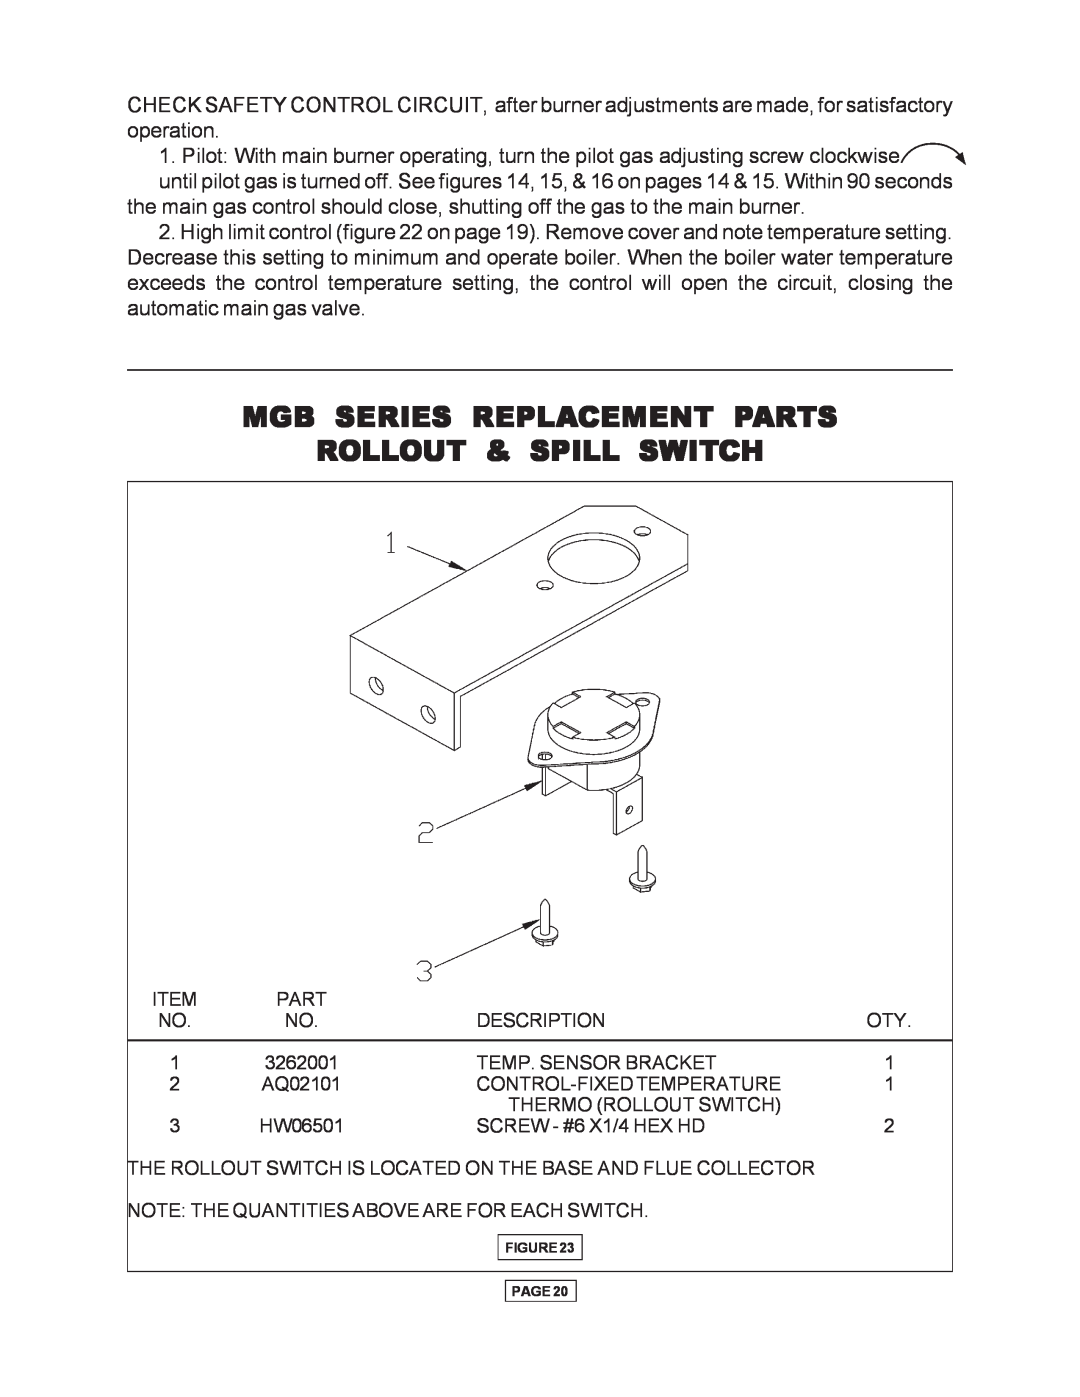 Utica Gas-fired Boiler manual Mgb Series Replacement Parts, Rollout & Spill Switch 